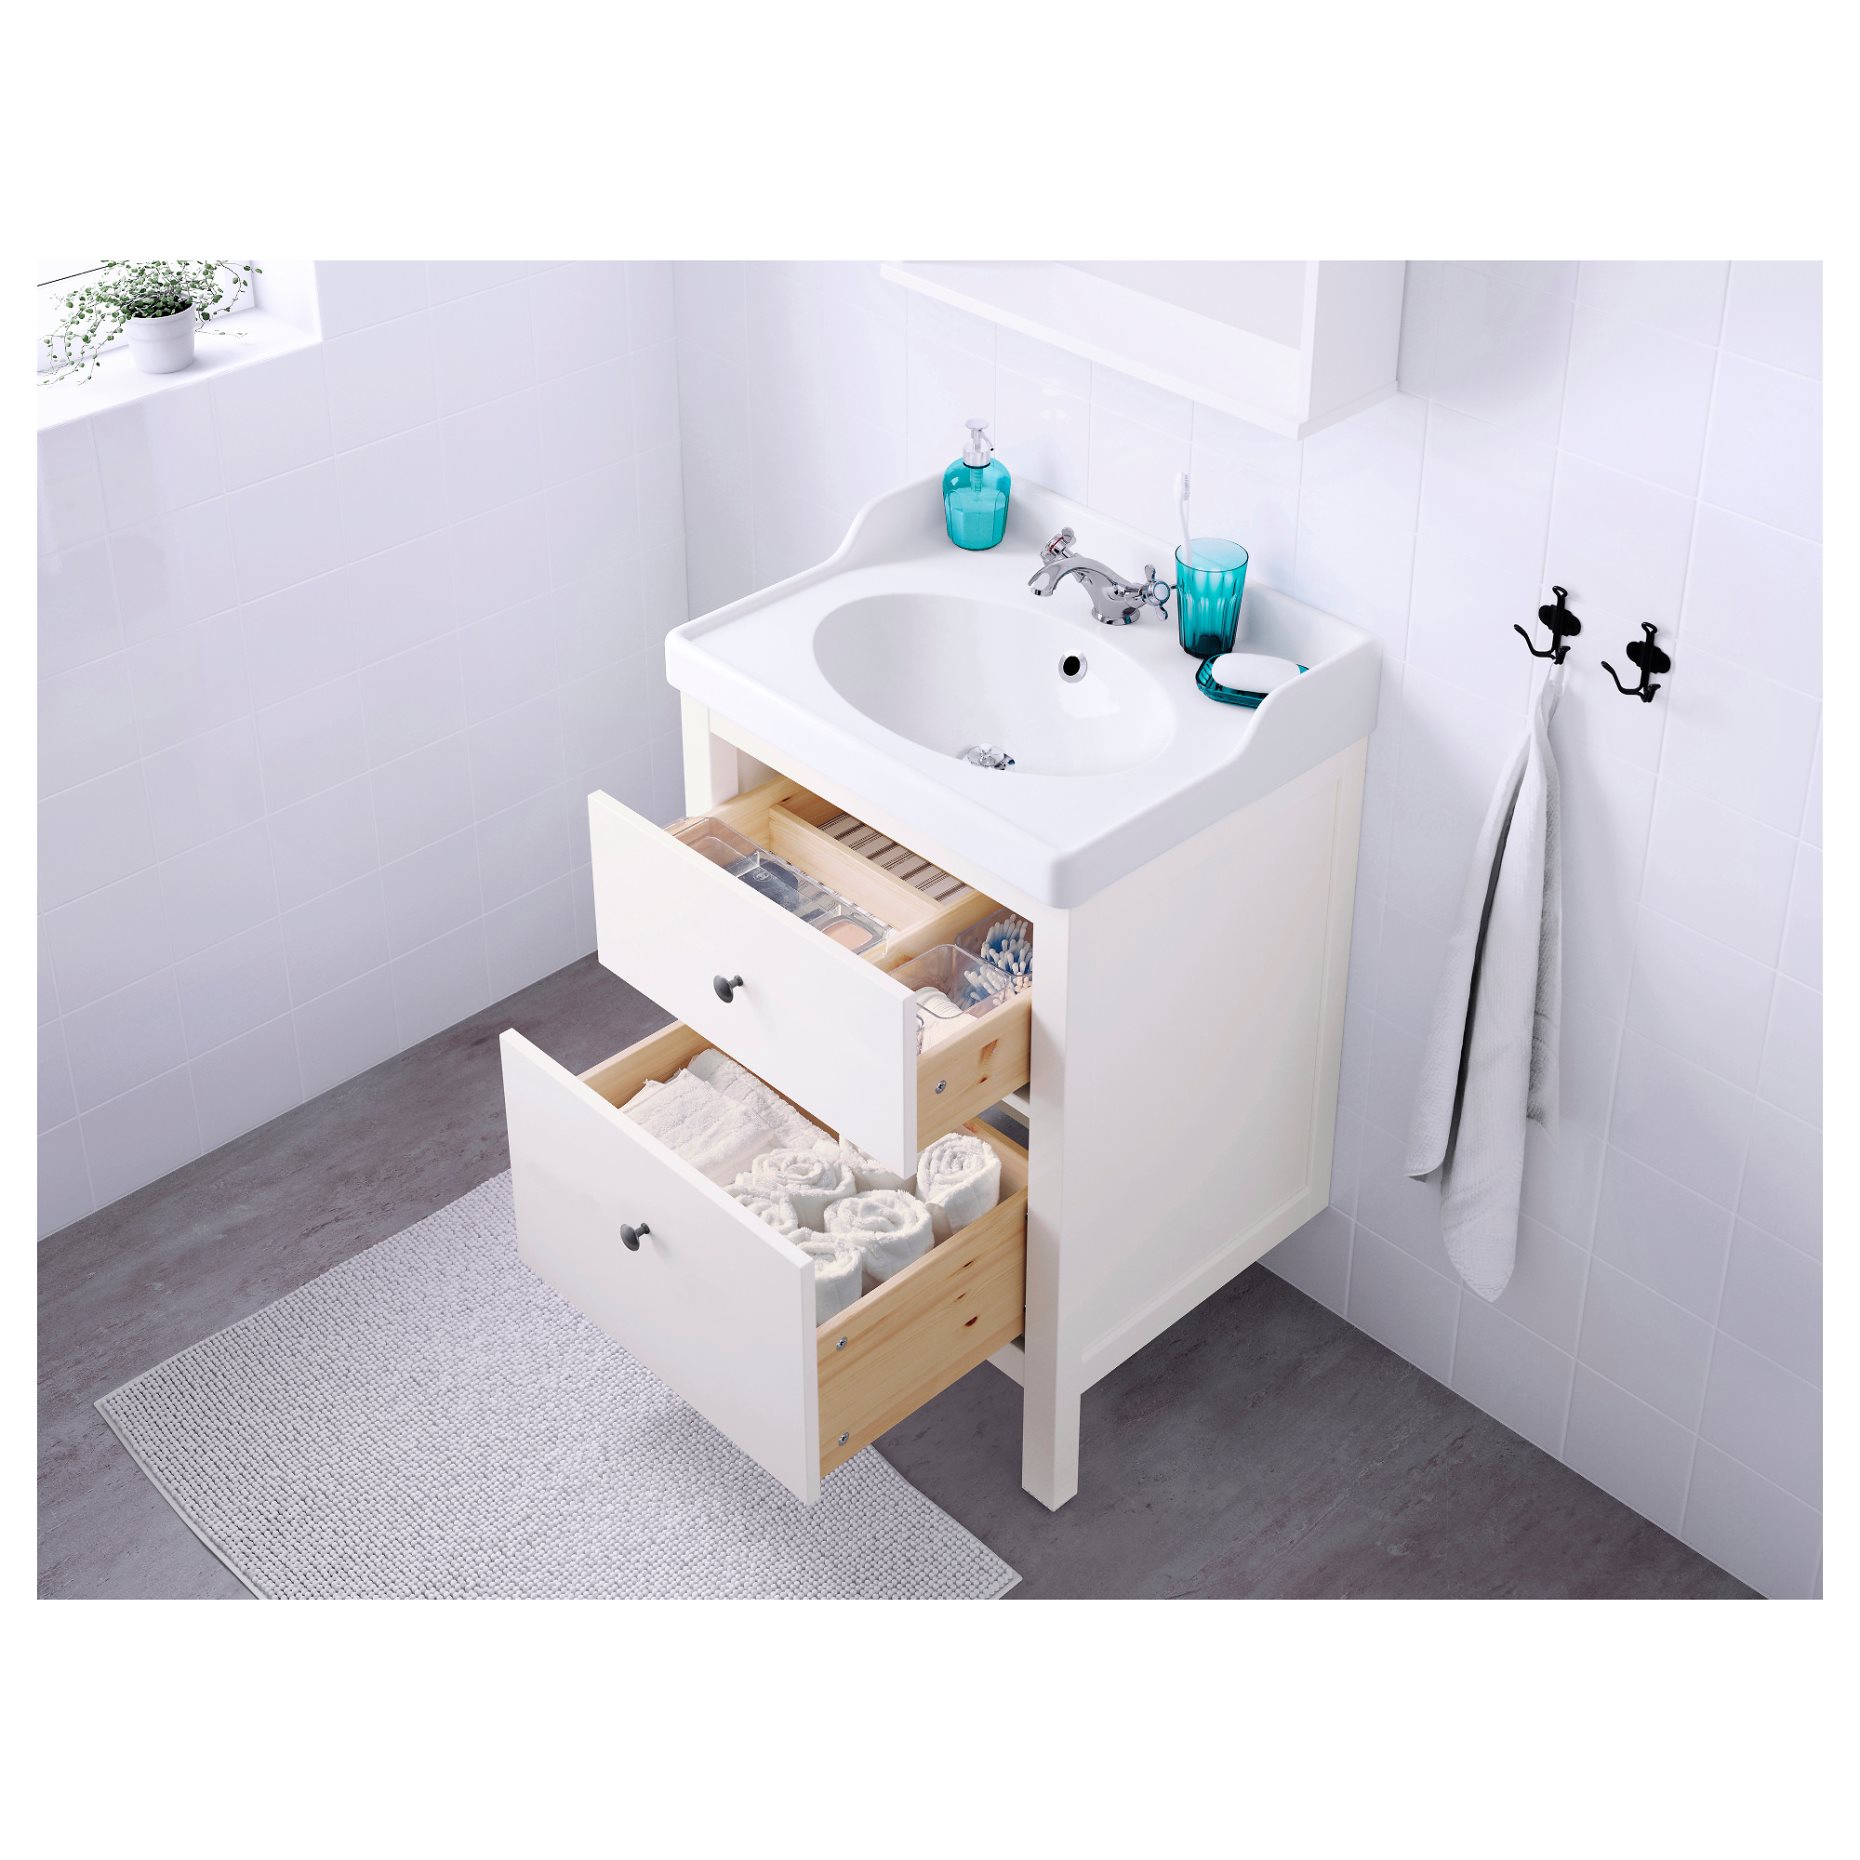 HEMNES, wash-stand with 2 drawers, 502.176.67